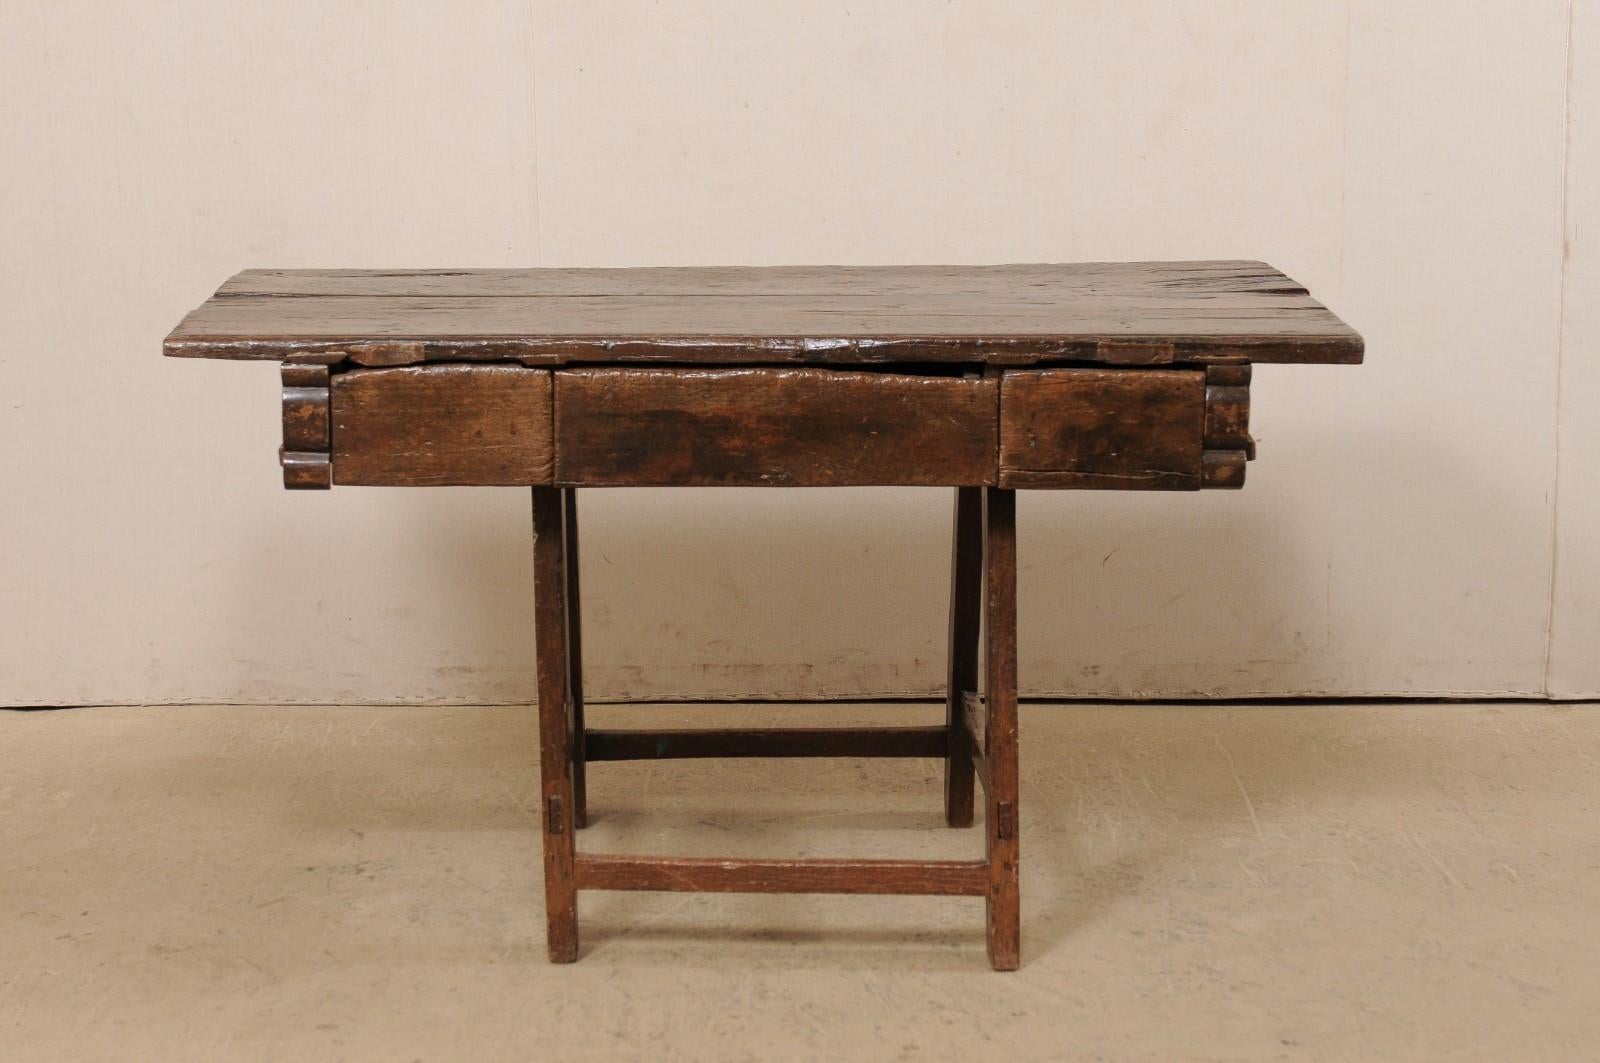 18th C. Brazilian Peroba Wood Table with Drawers, Exquisitely Rustic For Sale 7